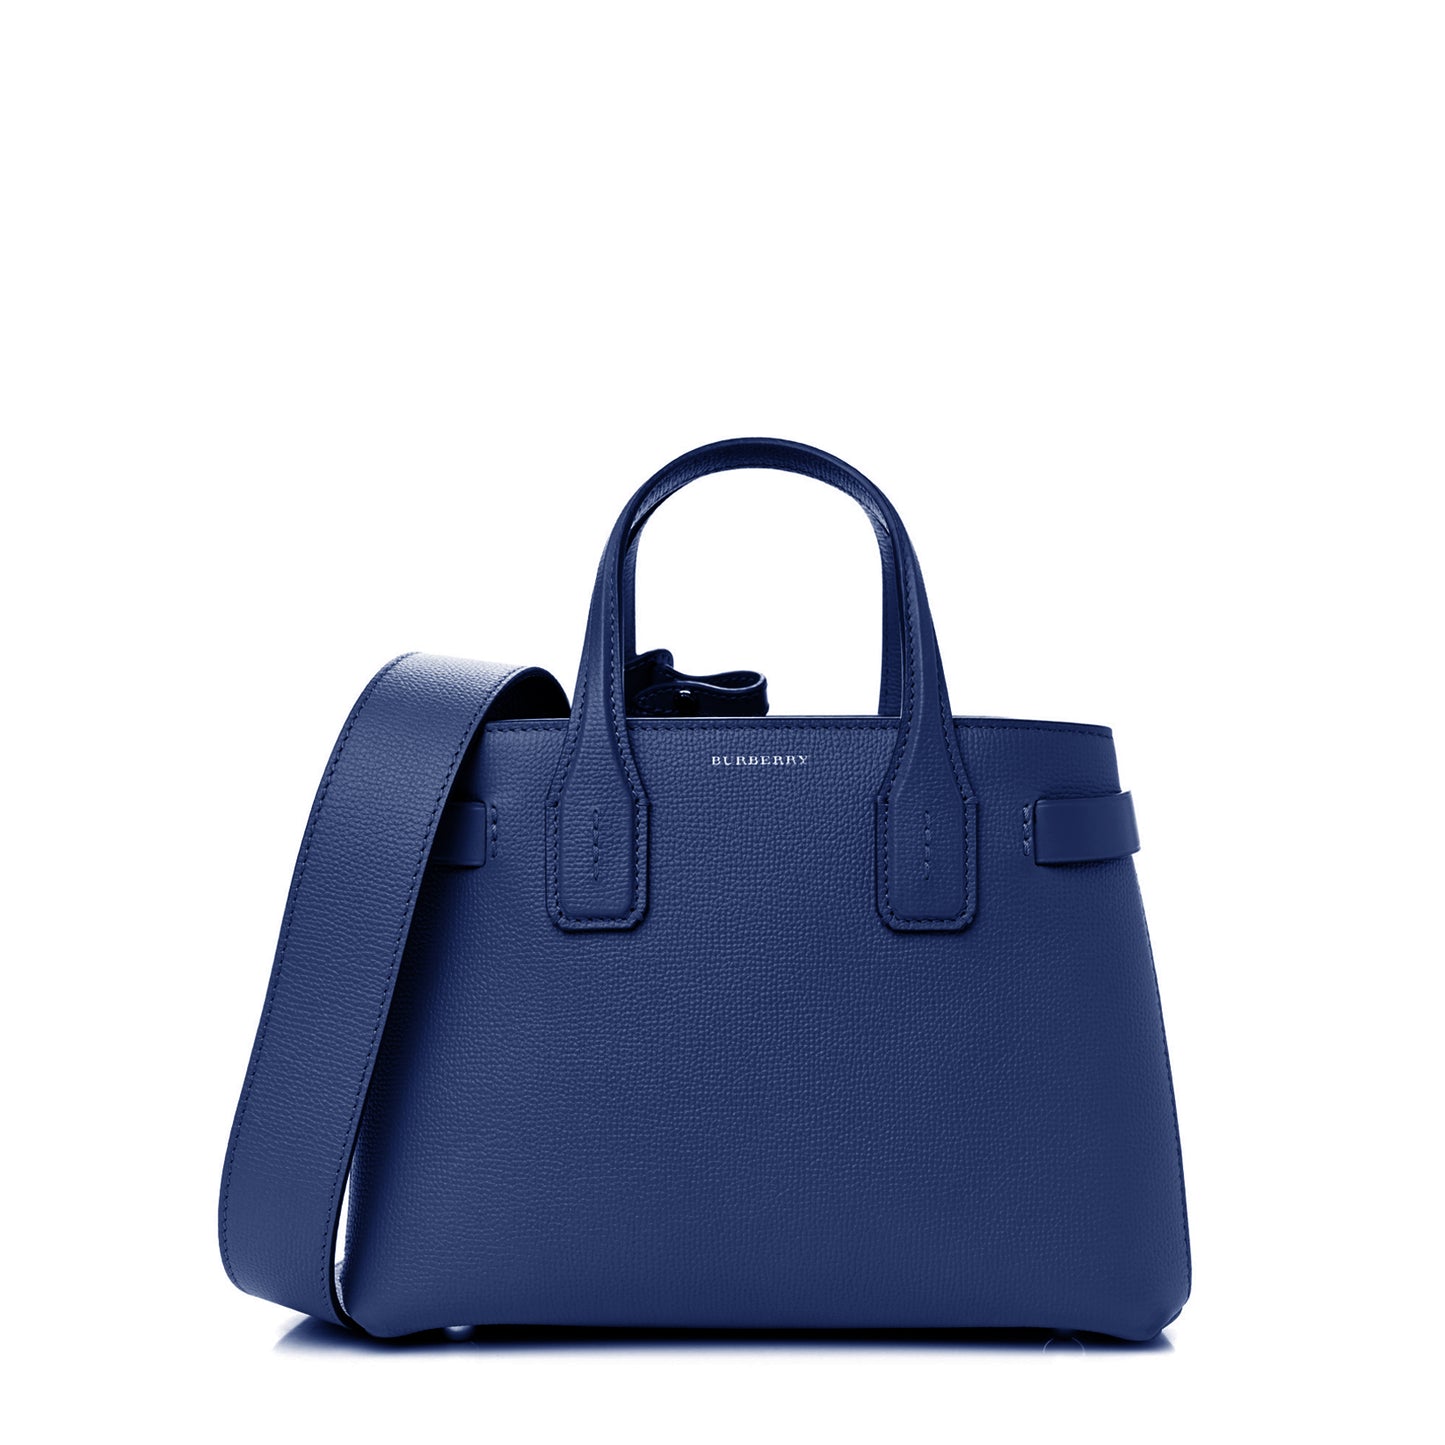 Burberry Women's Leather Zip Handbag with Removable Shoulder Strap in Blue